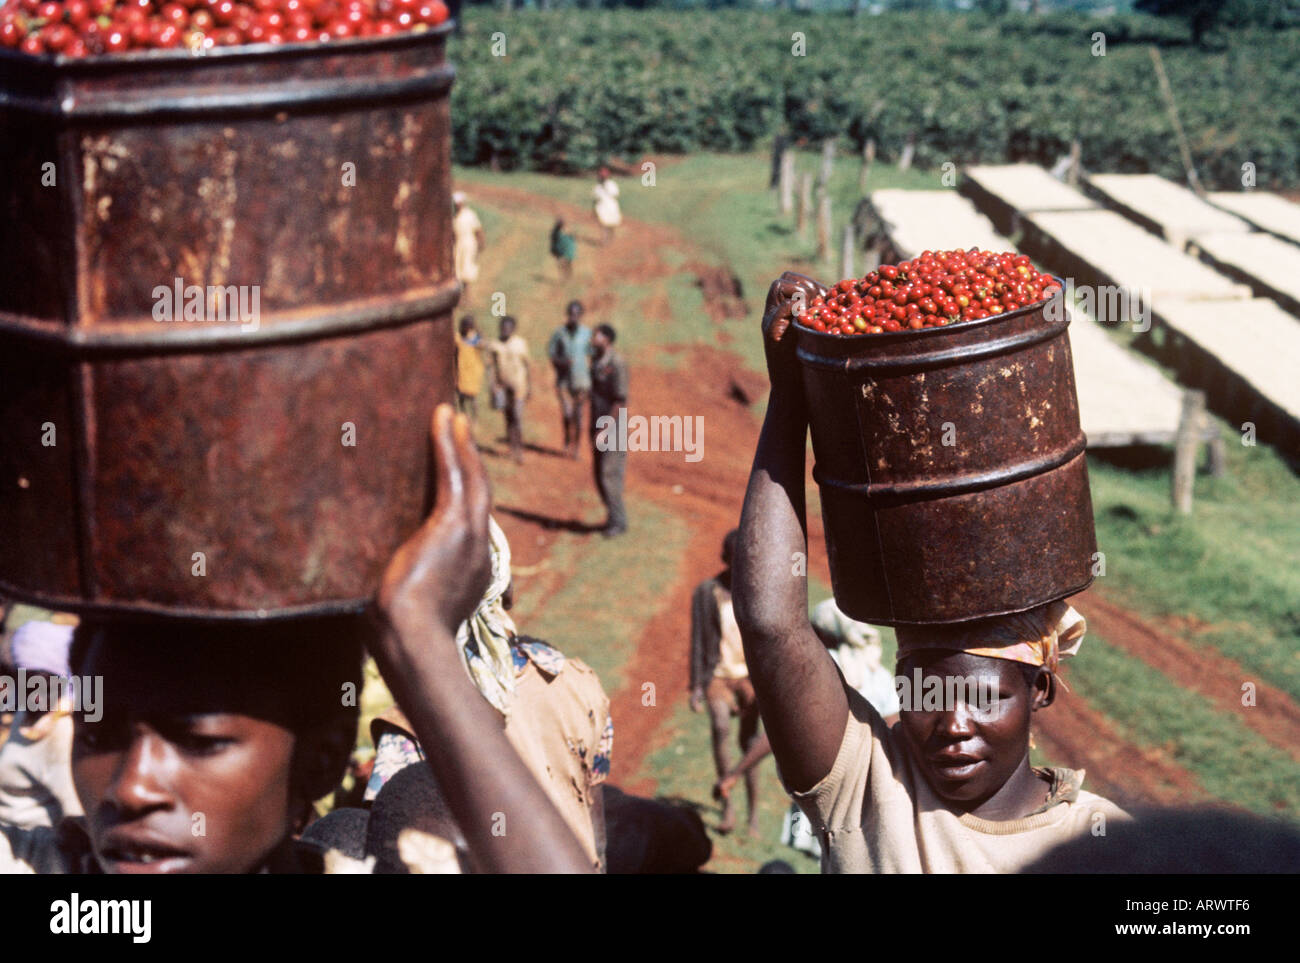 On a Kenya coffee plantation outside Nairobi women carry containers of coffee beans to the factory for drying and processing Stock Photo